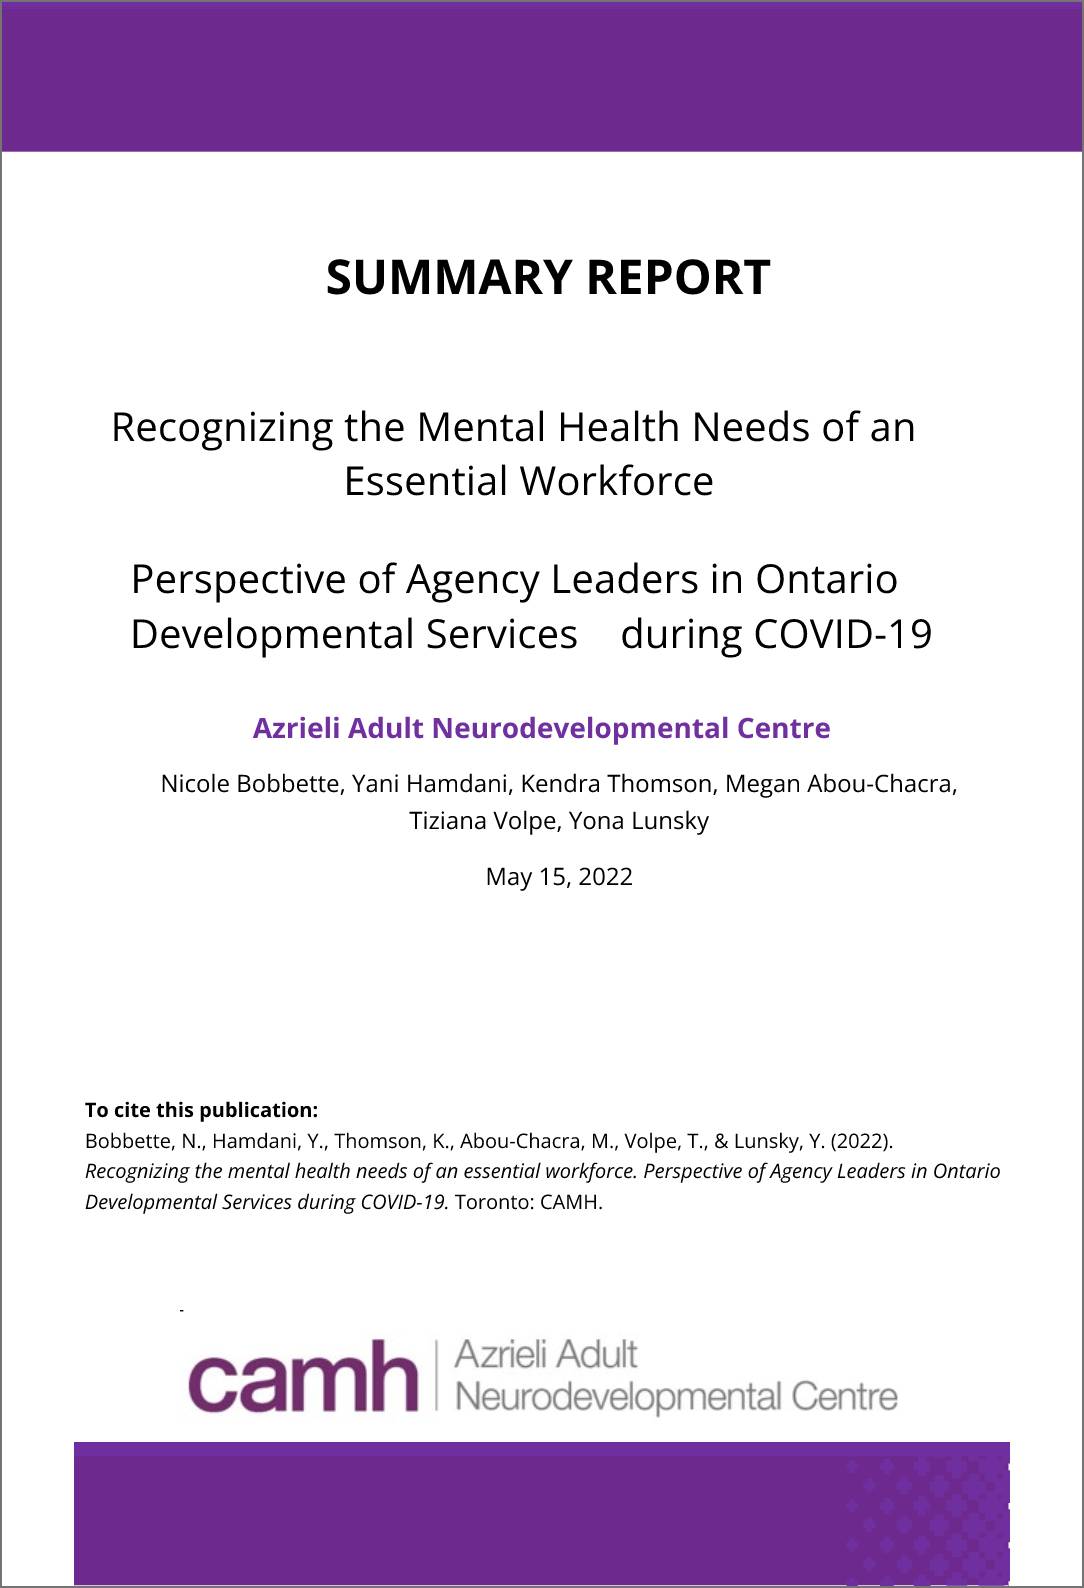 Recognizing the Mental Health Needs of an Essential Workforce: Perspective of Agency Leaders in Ontario Developmental Services during COVID-19